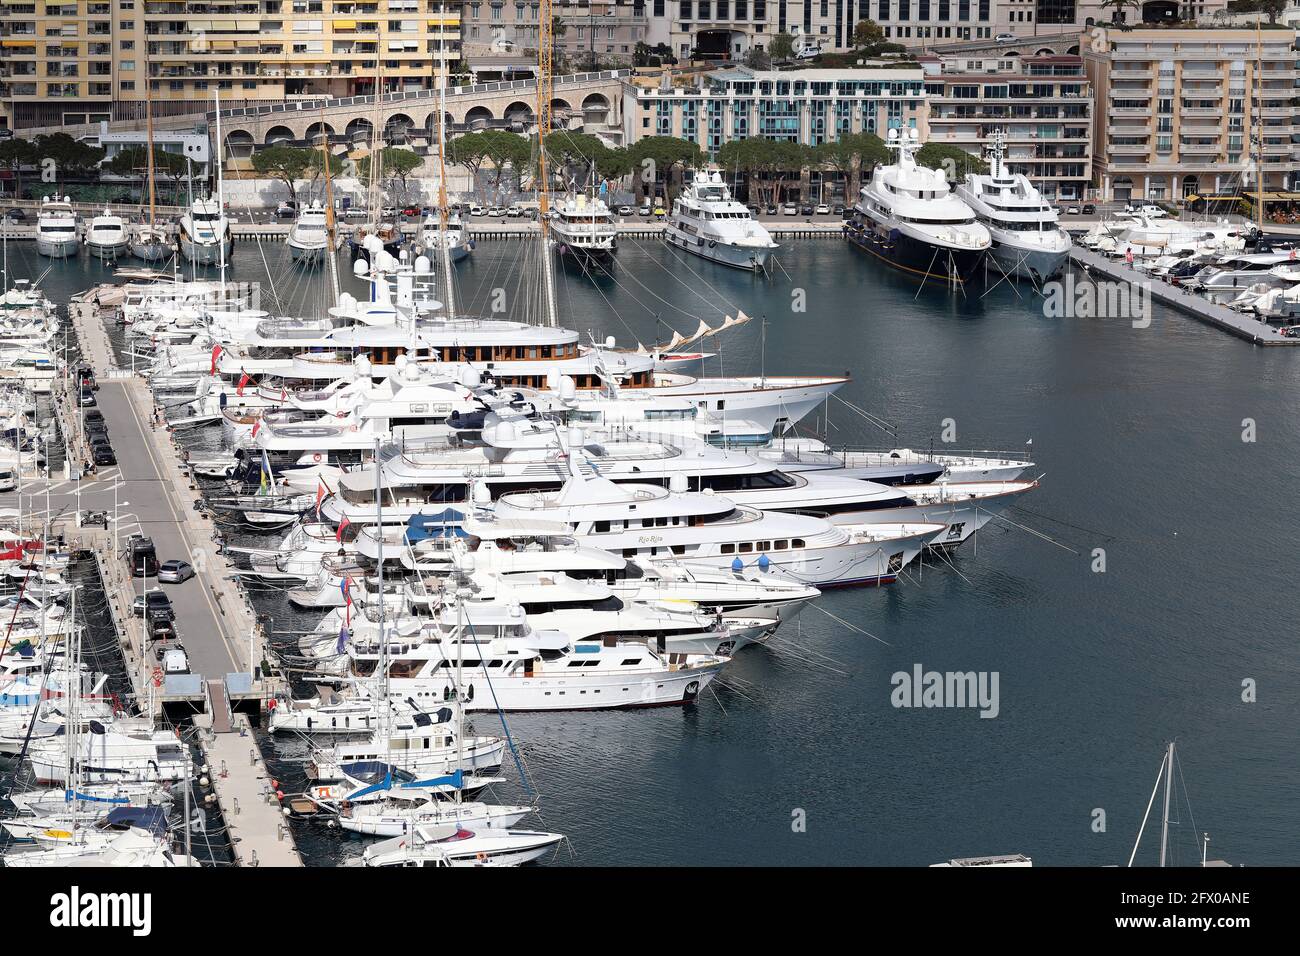 La Condamine, Monaco - February 20, 2021: Beautiful Luxury Yachts And Superyachts Are Lined Up In Port Hercule Monaco On The French Riviera, Europe, A Stock Photo